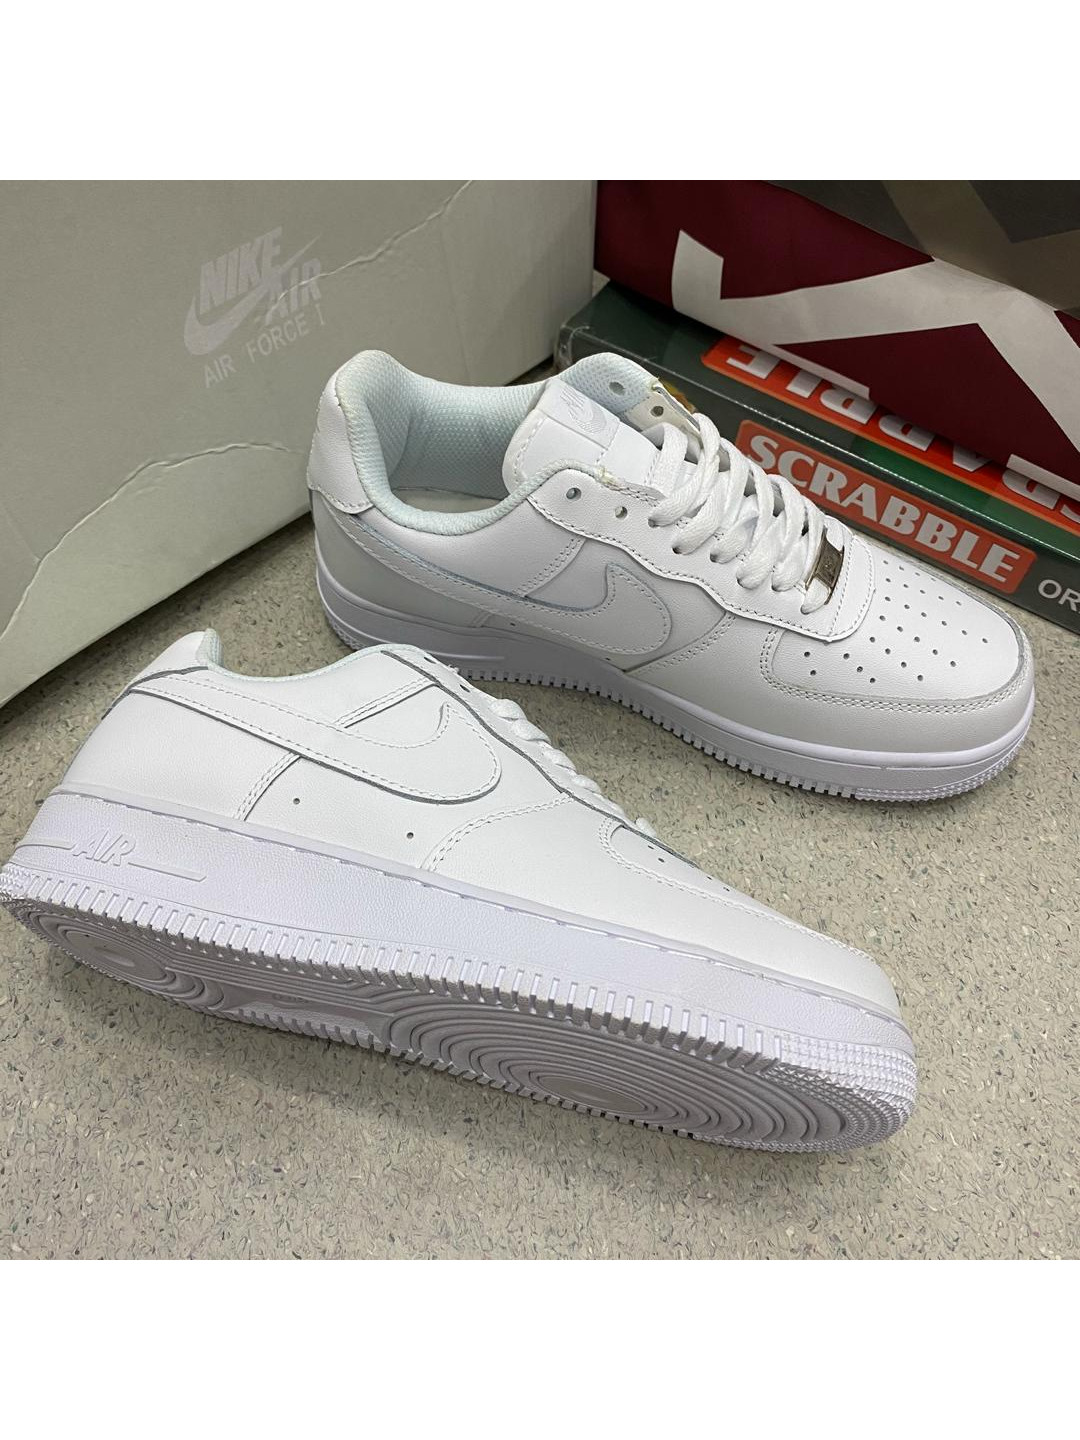 Original NIKE Air Force One Sneakers Available in Store in Lekki - Shoes,  Bizzcouture Abiola